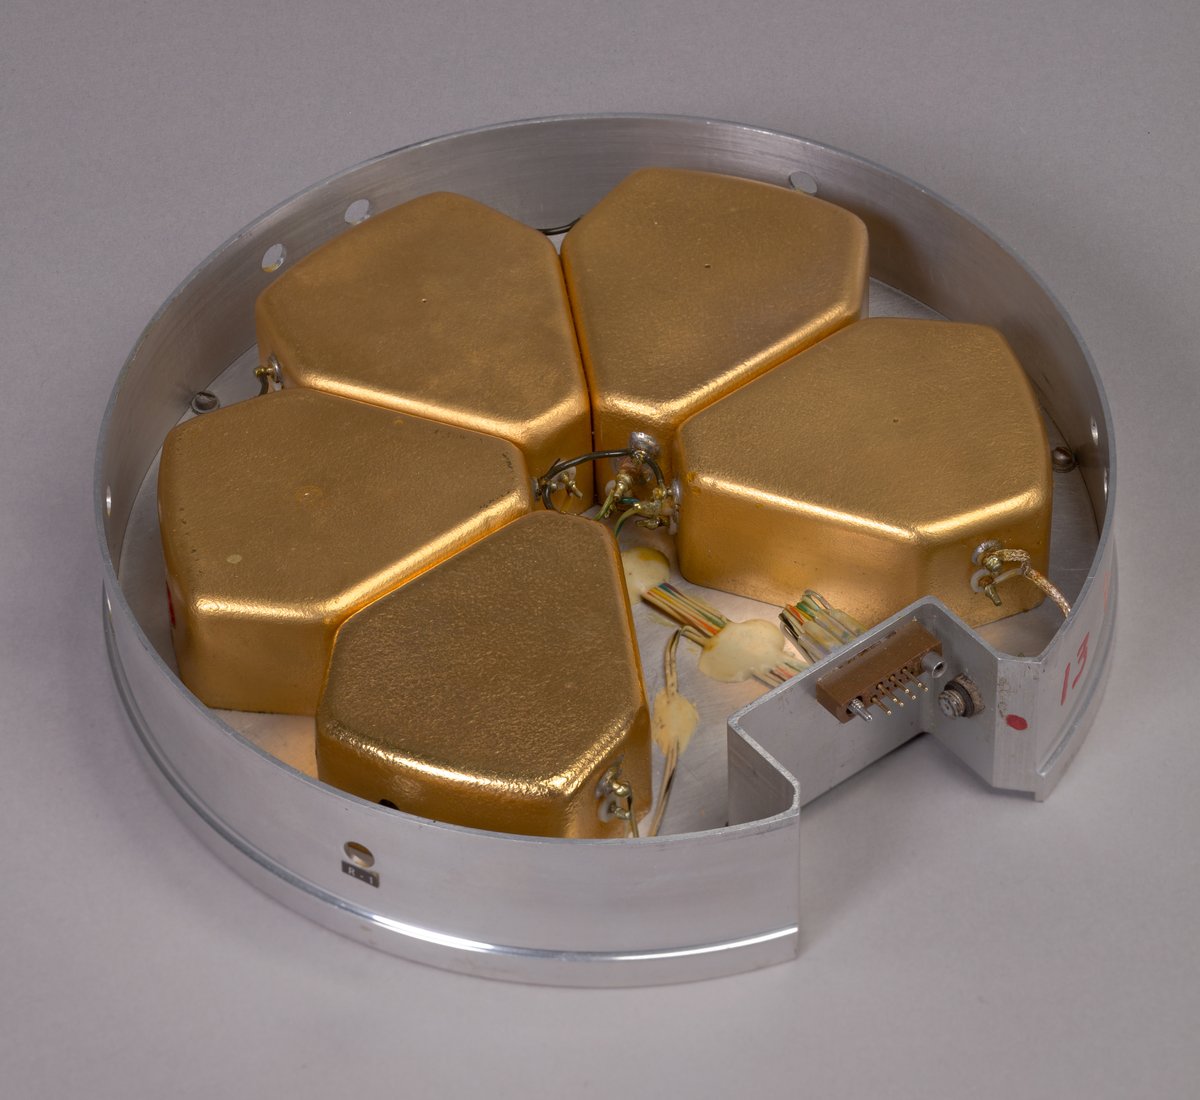 each module can be very different inside. here's one of them, a 125mW transmitter. each section is isolated from the other using those gold-plated metal RF shield cans.